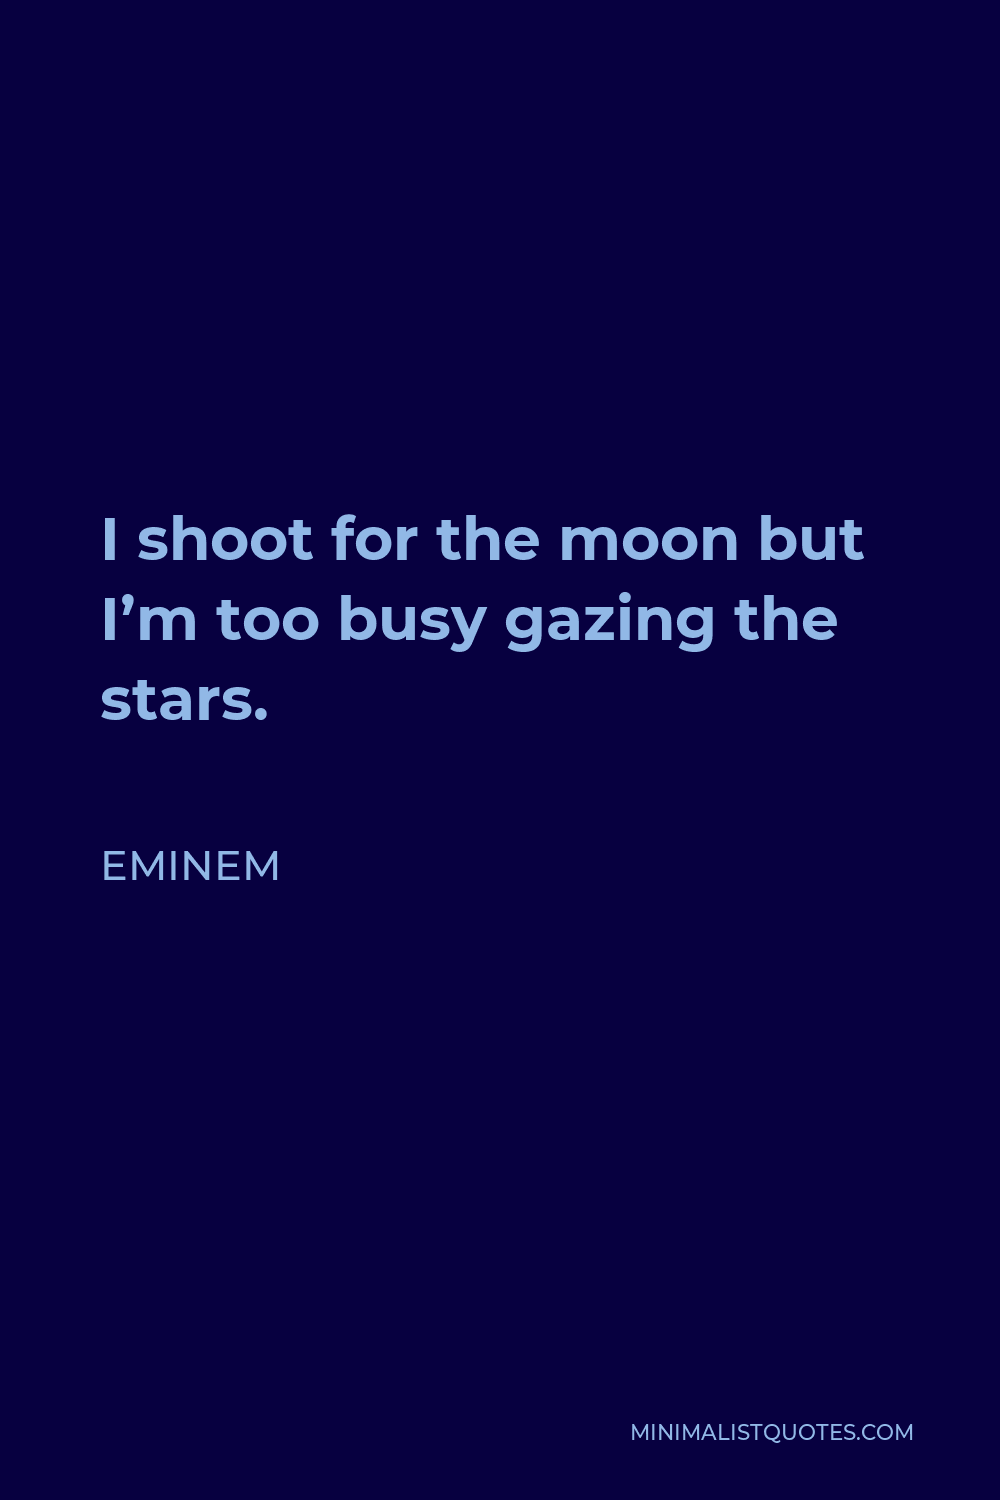 Eminem Quote - I shoot for the moon but I’m too busy gazing the stars.